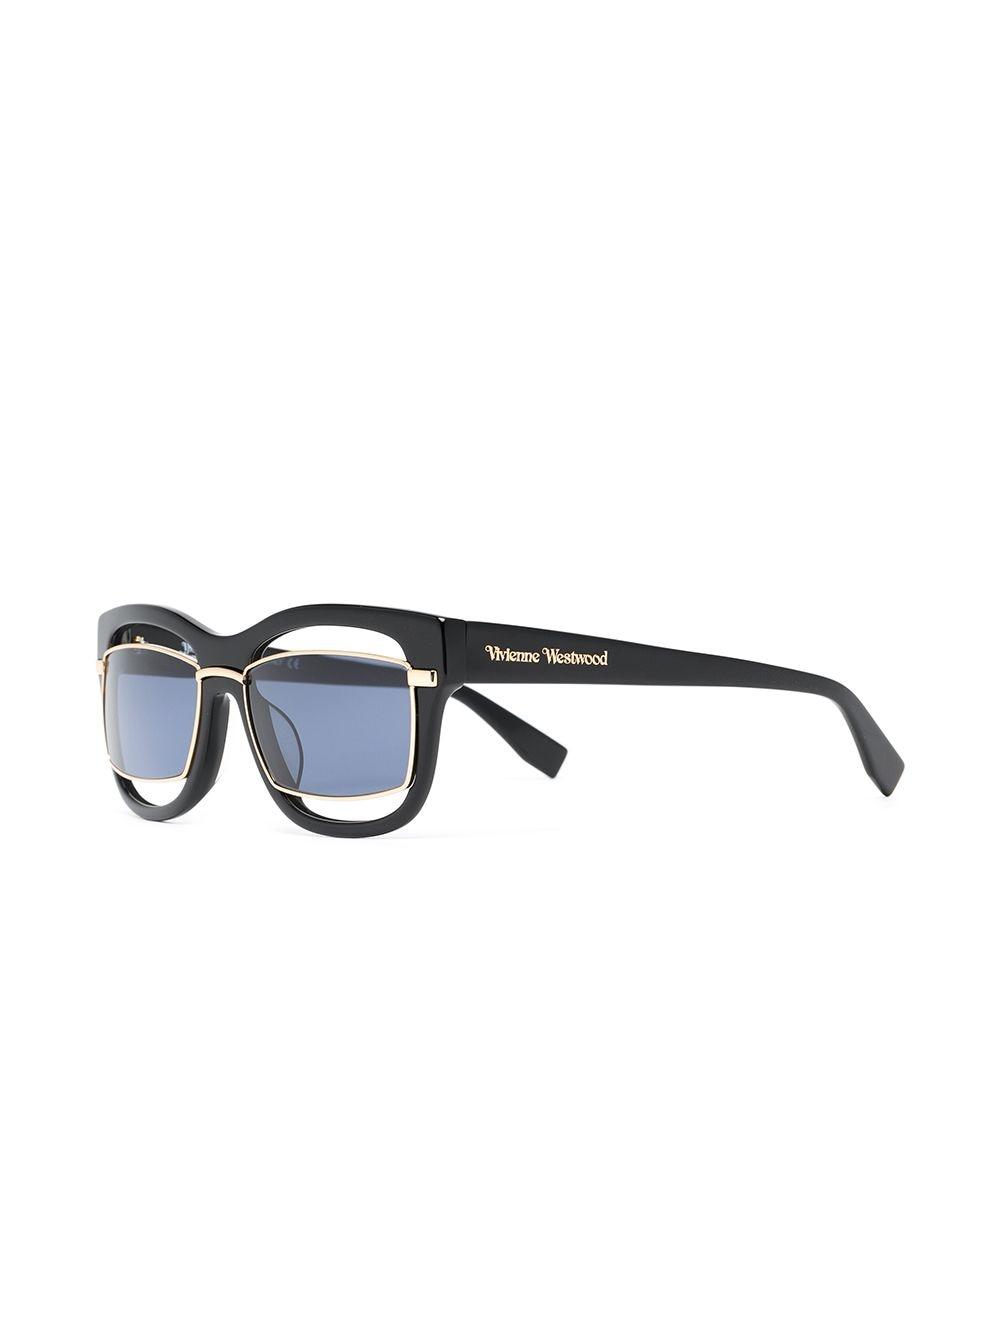 Vivienne Westwood Double Layer Squared-frame Sunglasses in Black | Lyst